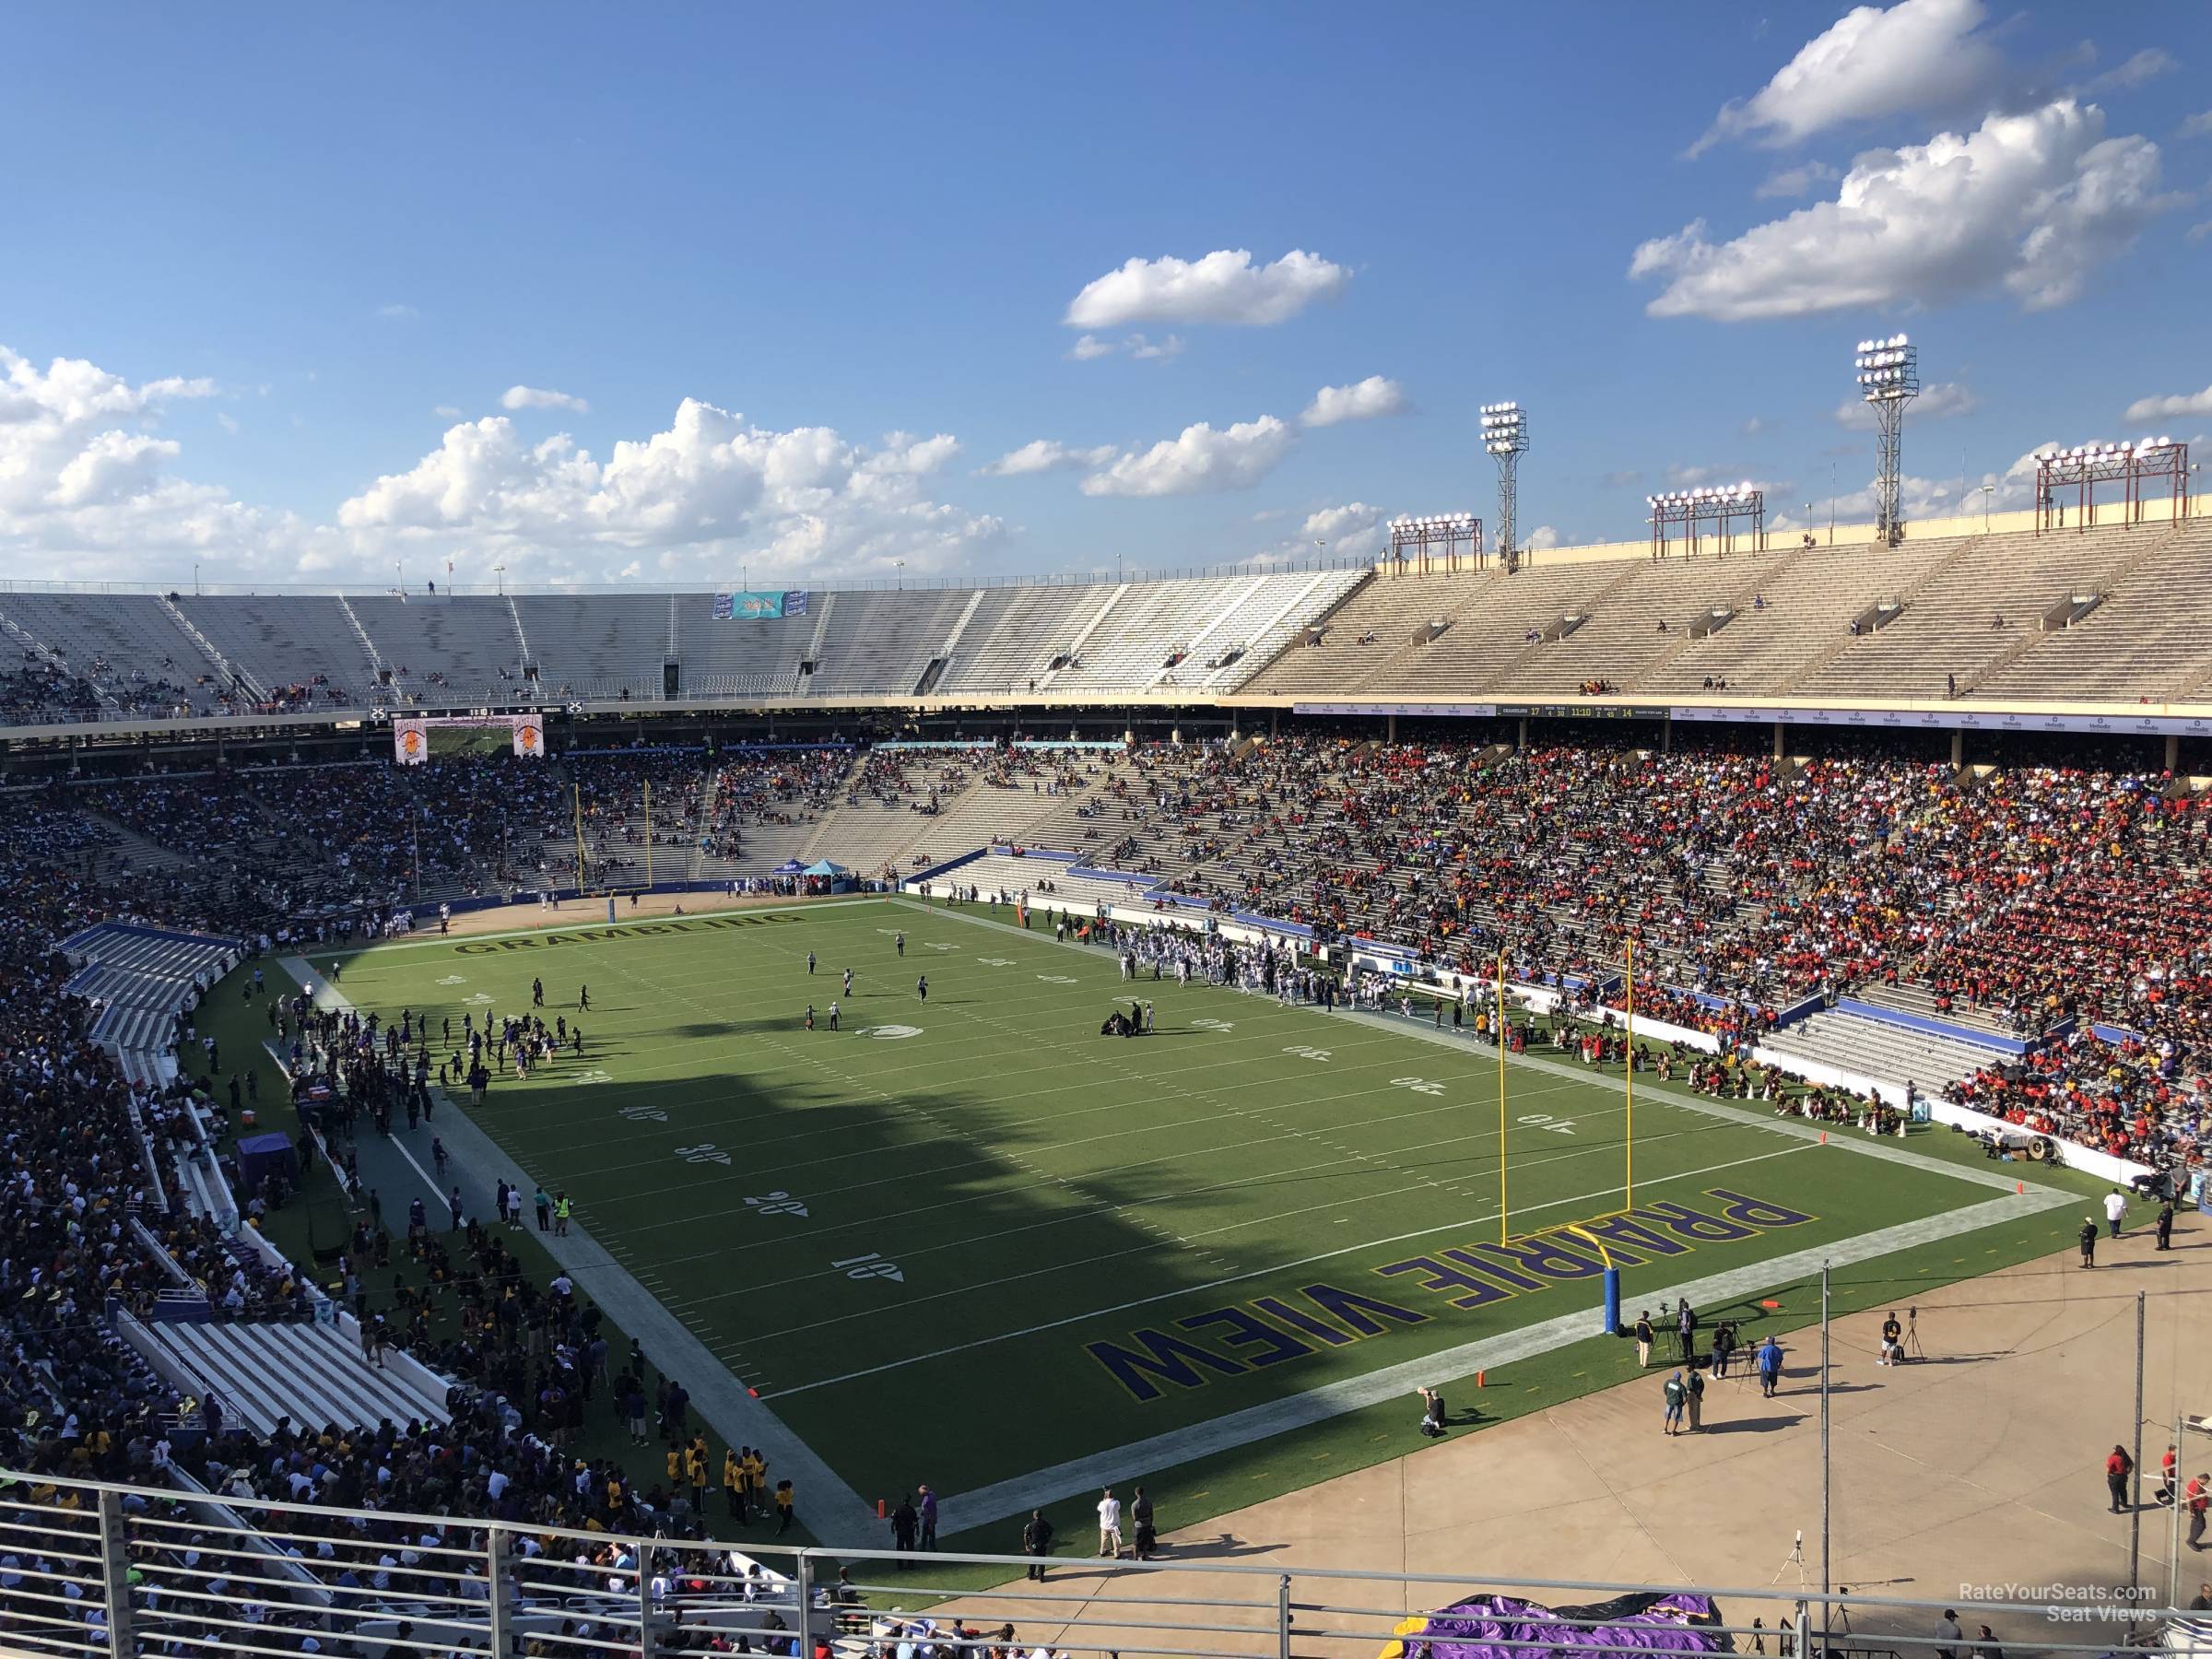 section 142, row 8 seat view  - cotton bowl